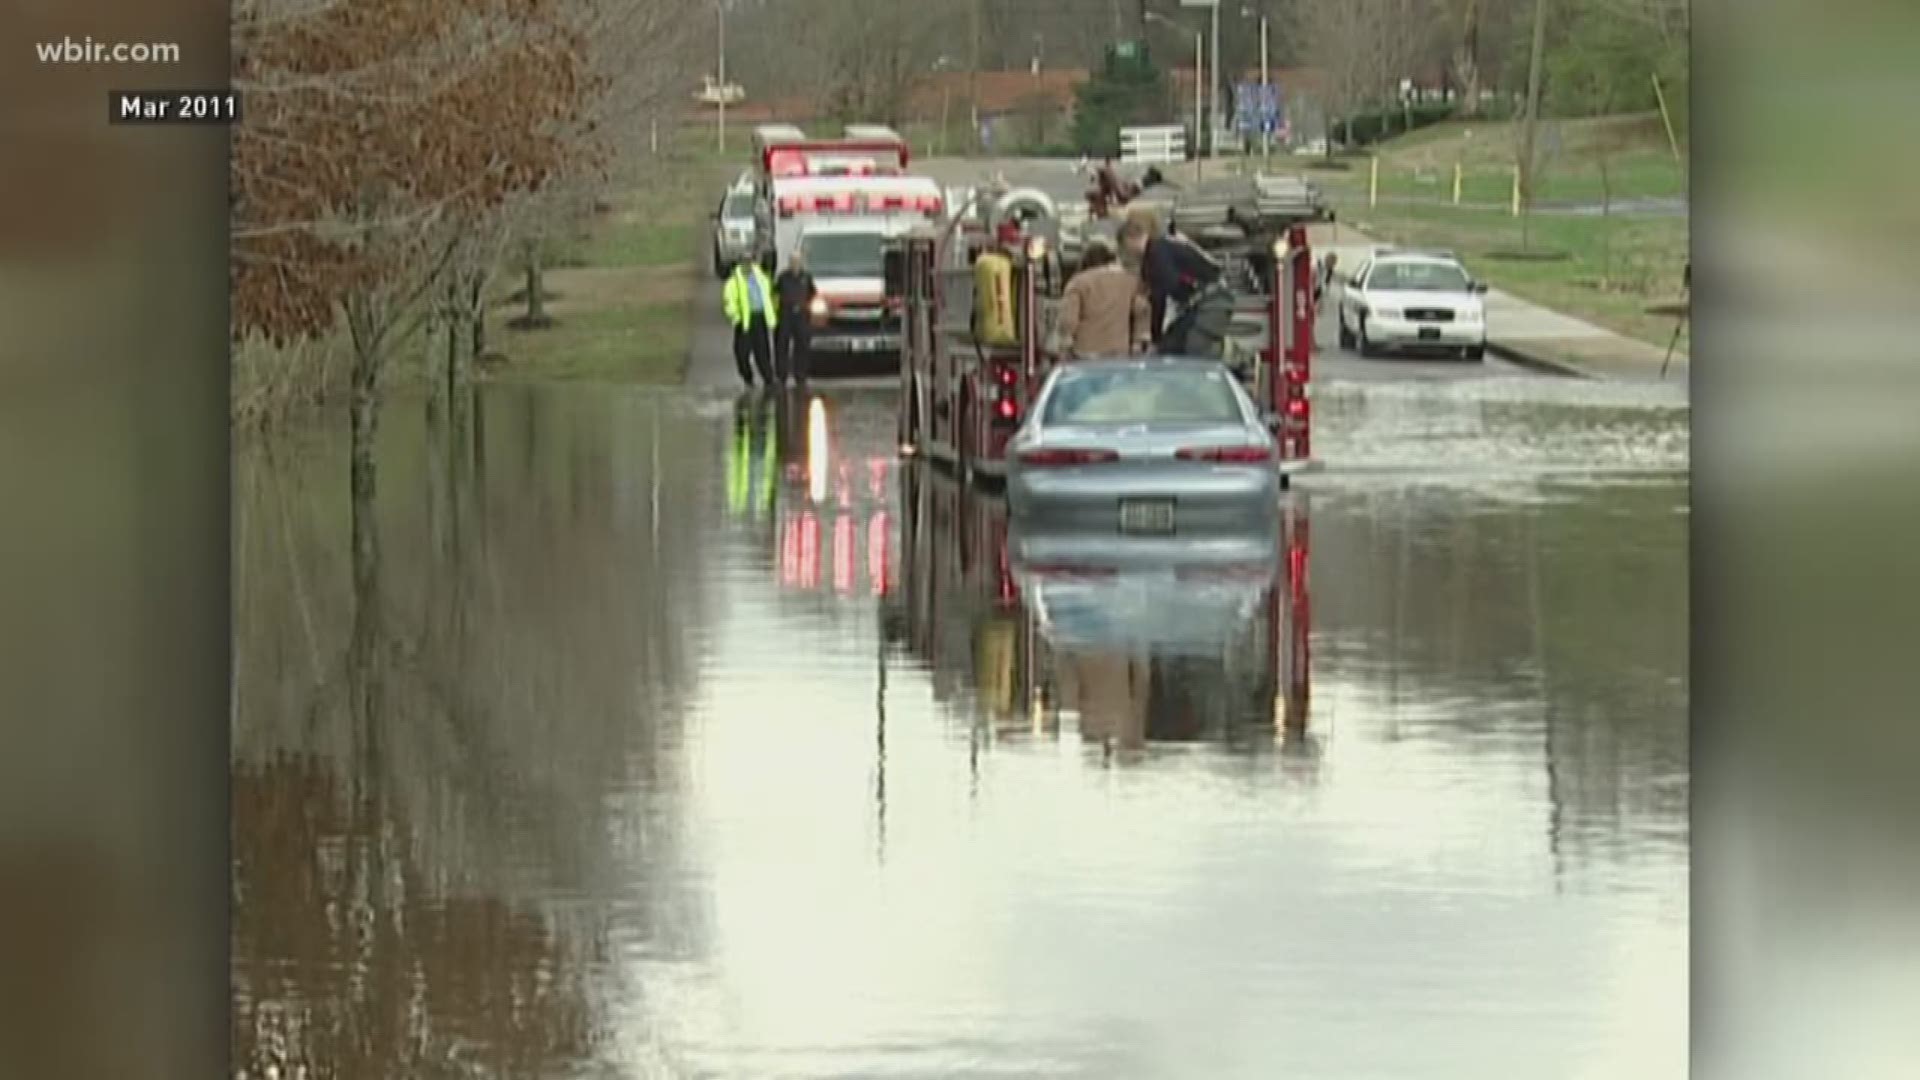 With flooding a concern the next few days, some parts of Knoxville won't flood because of all the work that city officials have done to mitigate flooding concerns